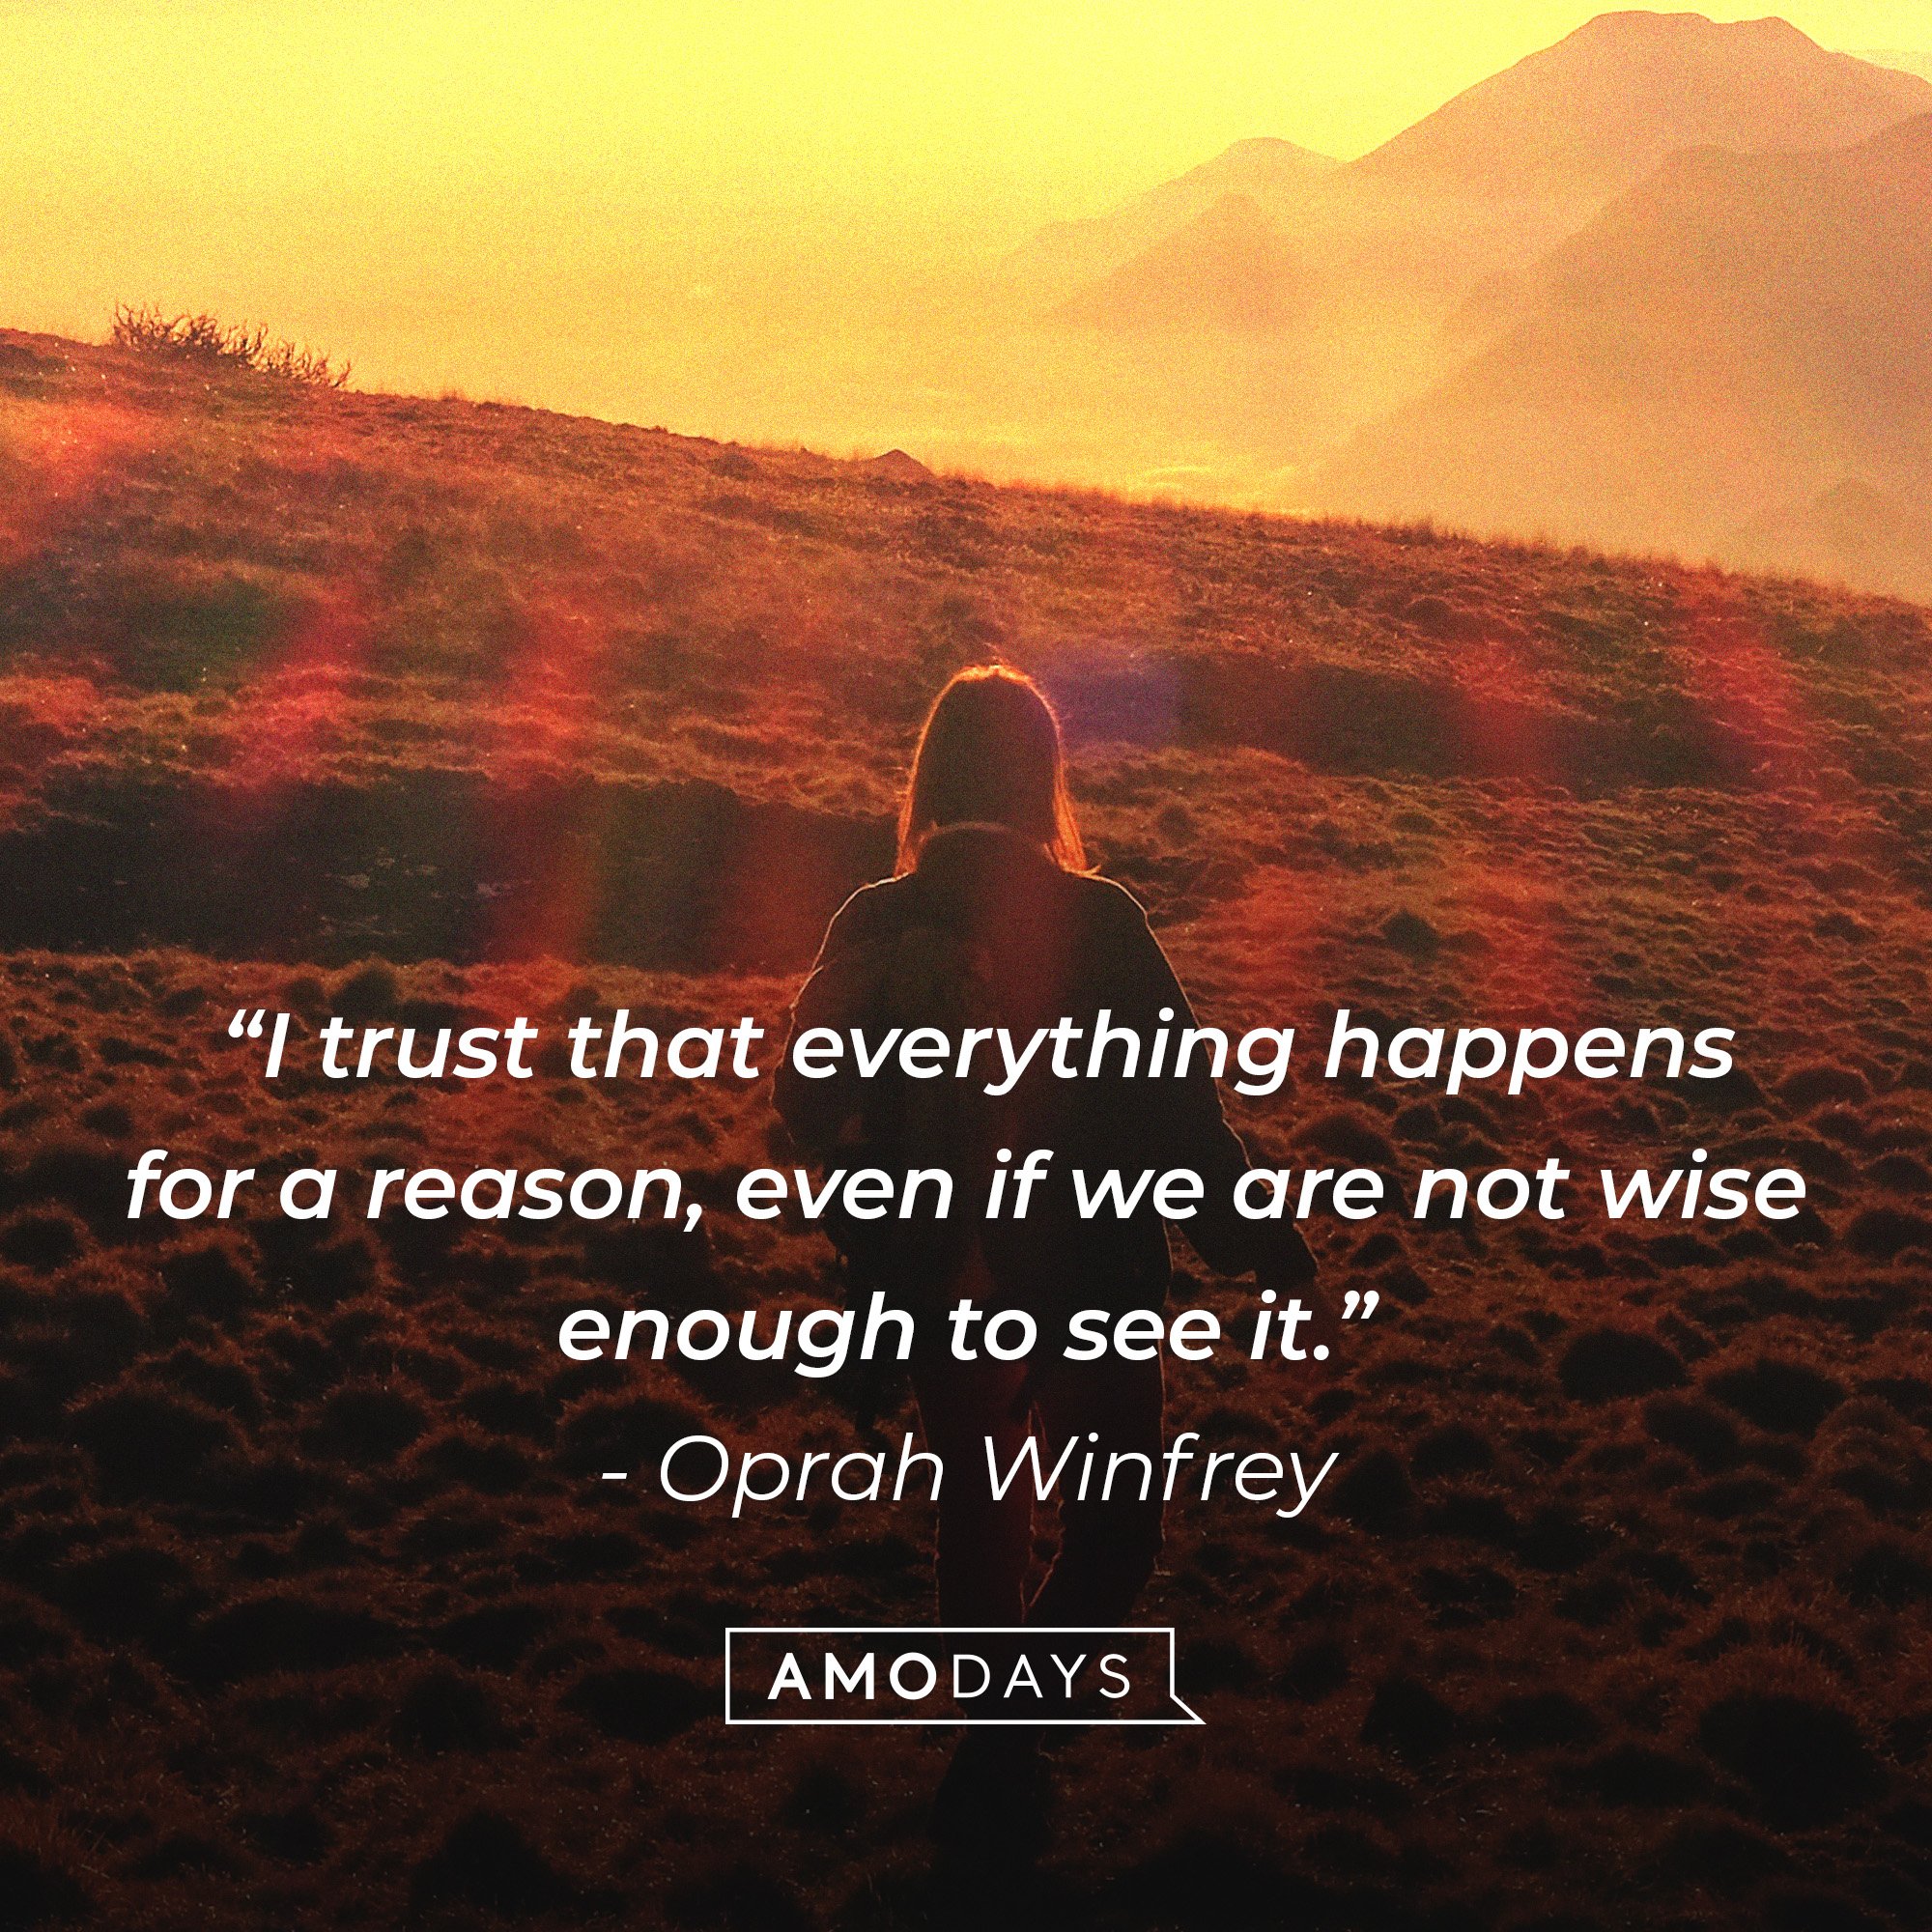   Oprah Winfrey's quote: “I trust that everything happens for a reason, even if we are not wise enough to see it.”| Image: AmoDays